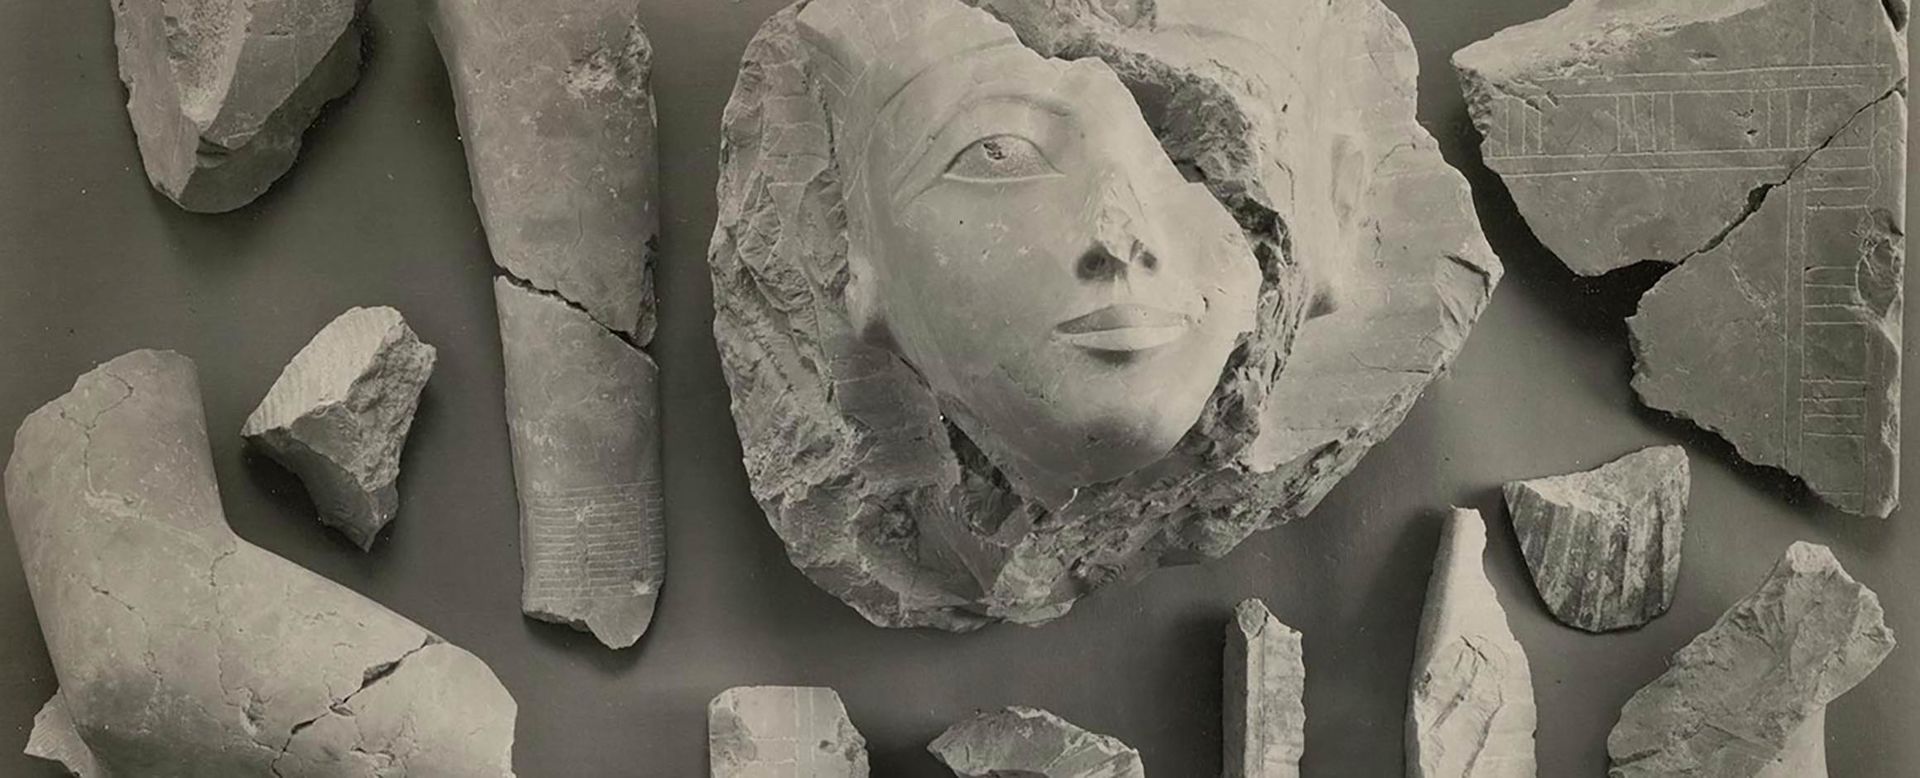 Black-and-white photo of various pieces of a statue of Hatshepsut disassembled